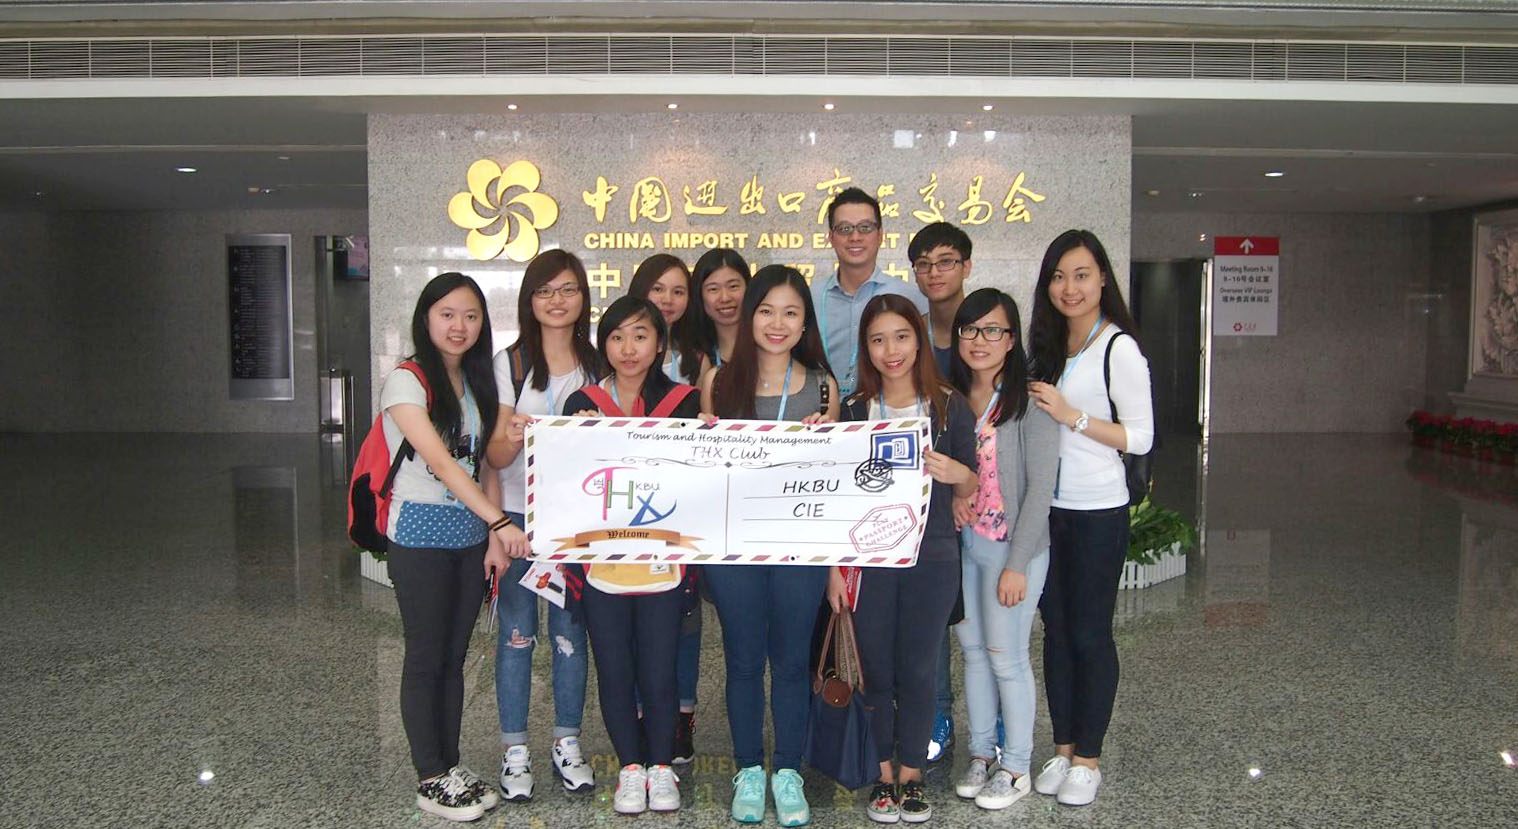 Students found the visit inspiring as they have gained a deeper understanding about the operations in the event and exhibition industry in Mainland China